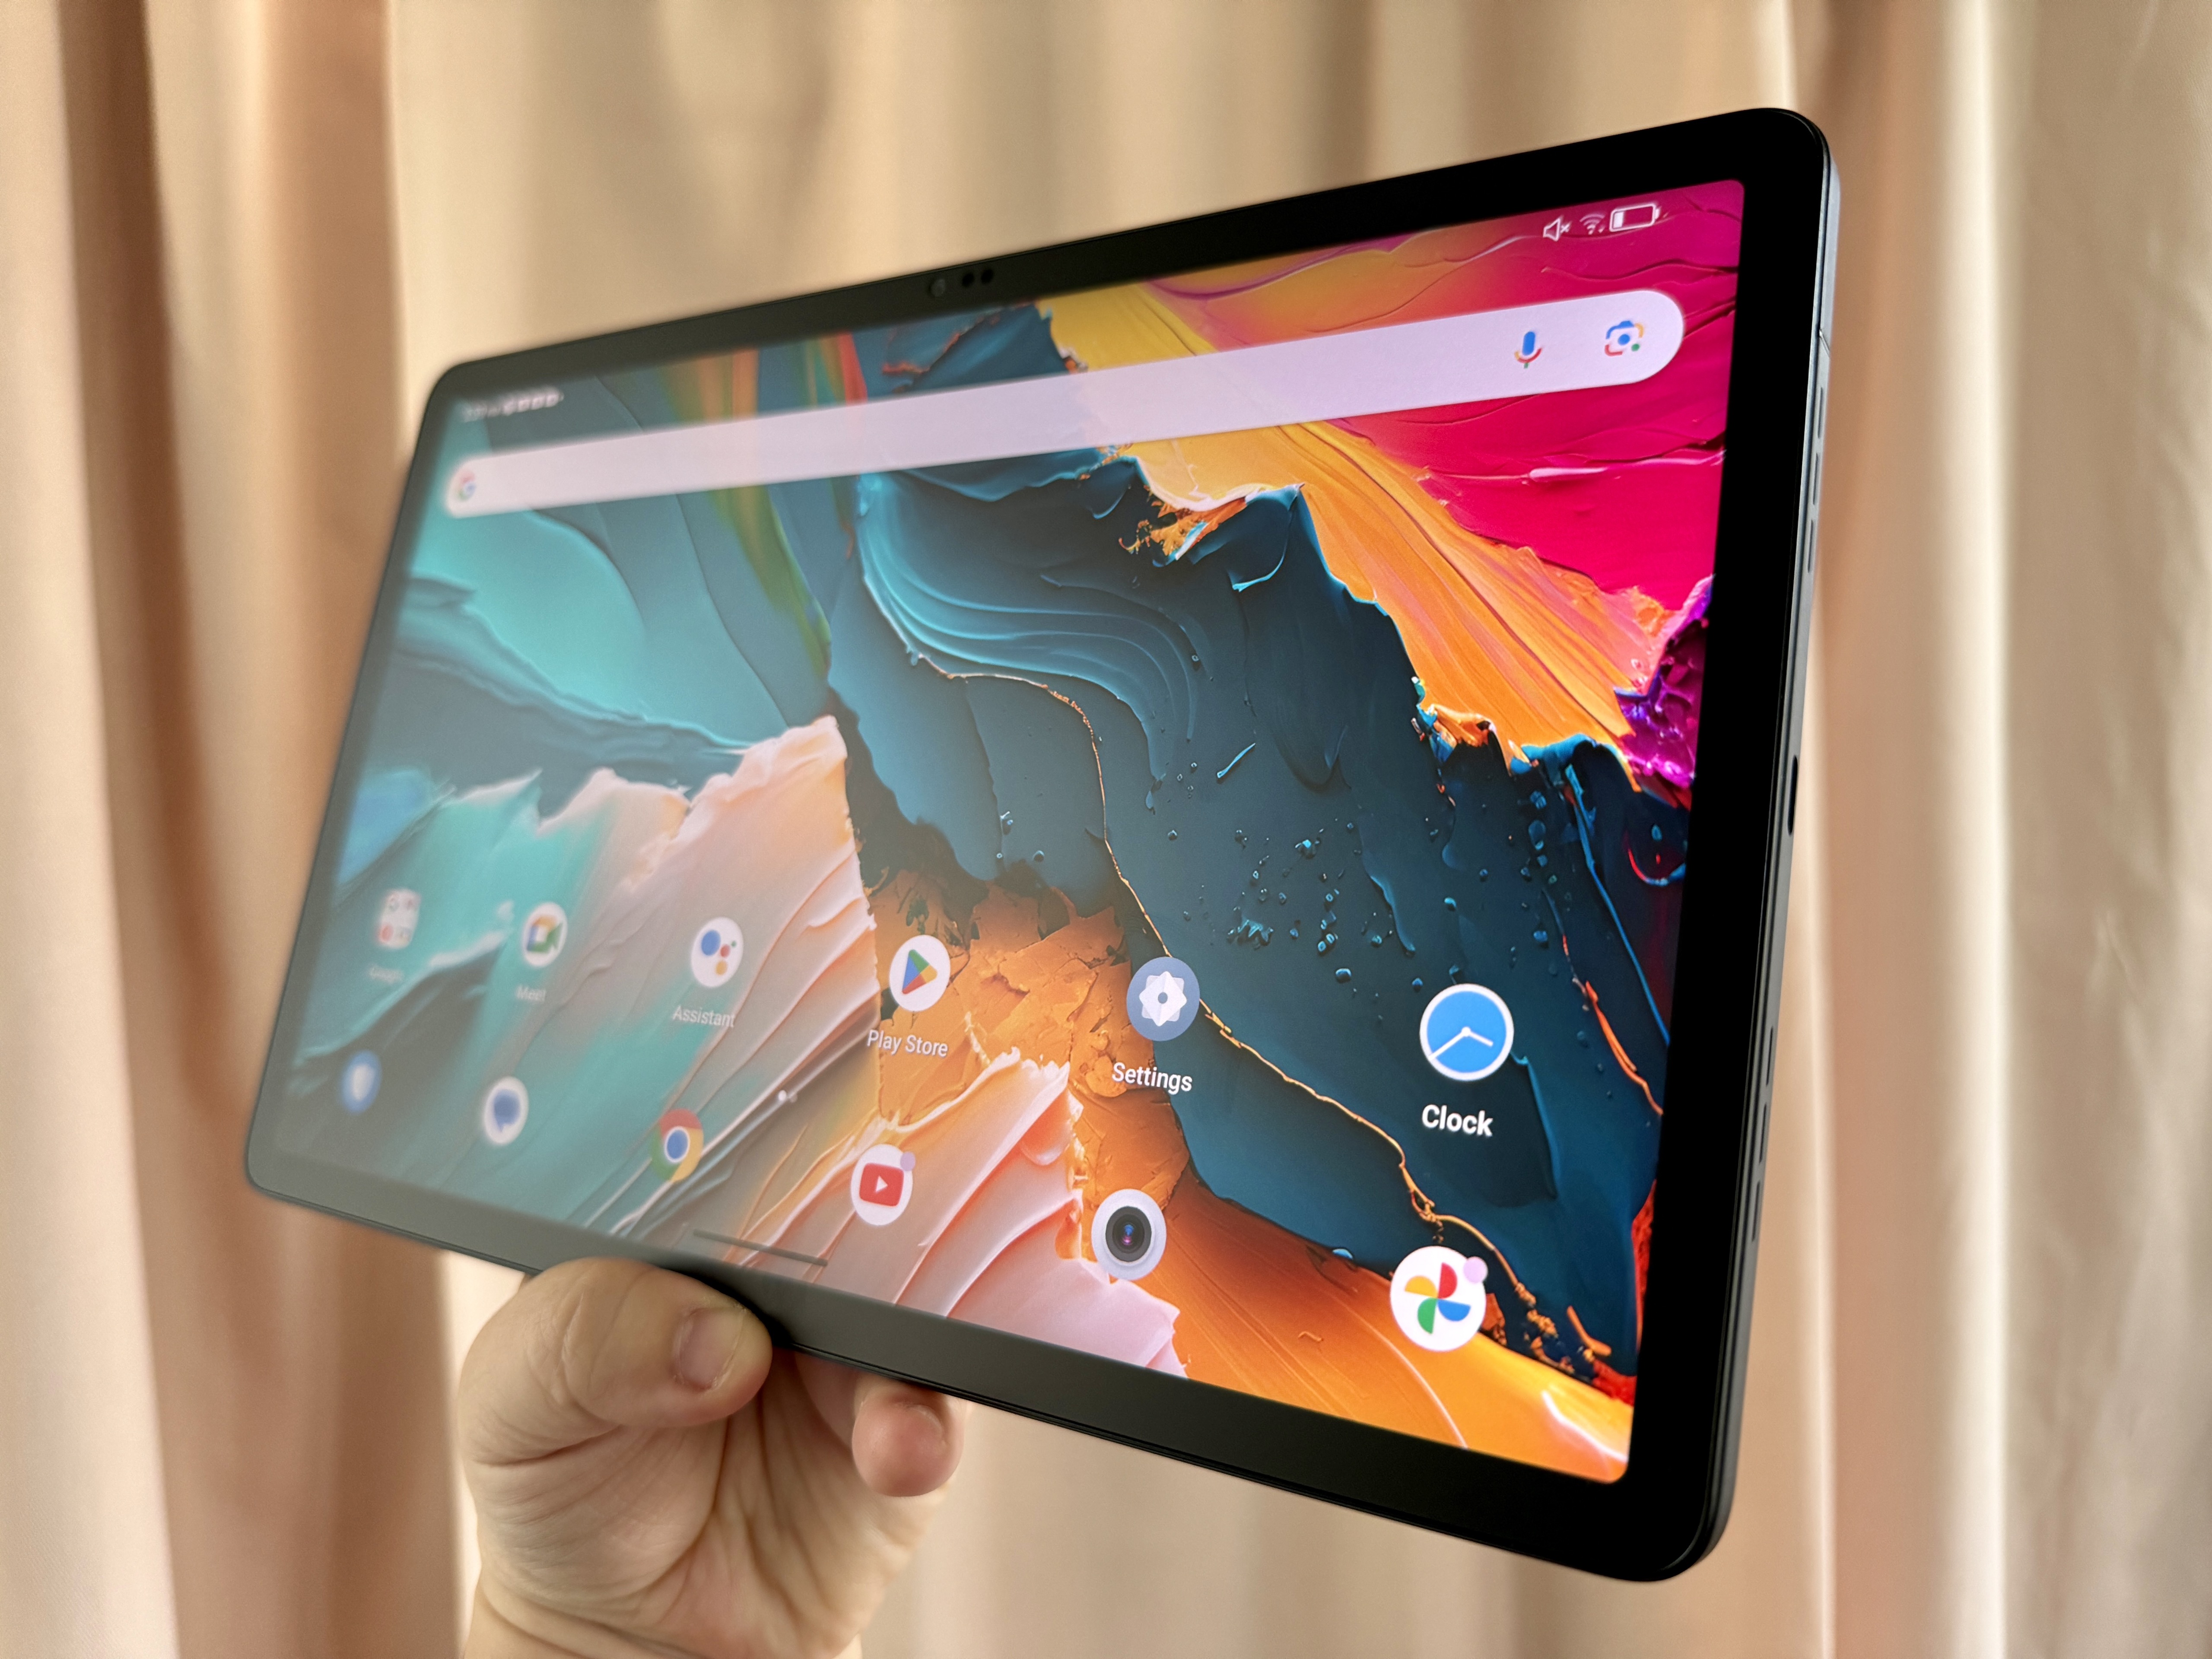 TCL NXTPAPER 11 is the first tablet with a NXTPAPER 2.0 display - Liliputing